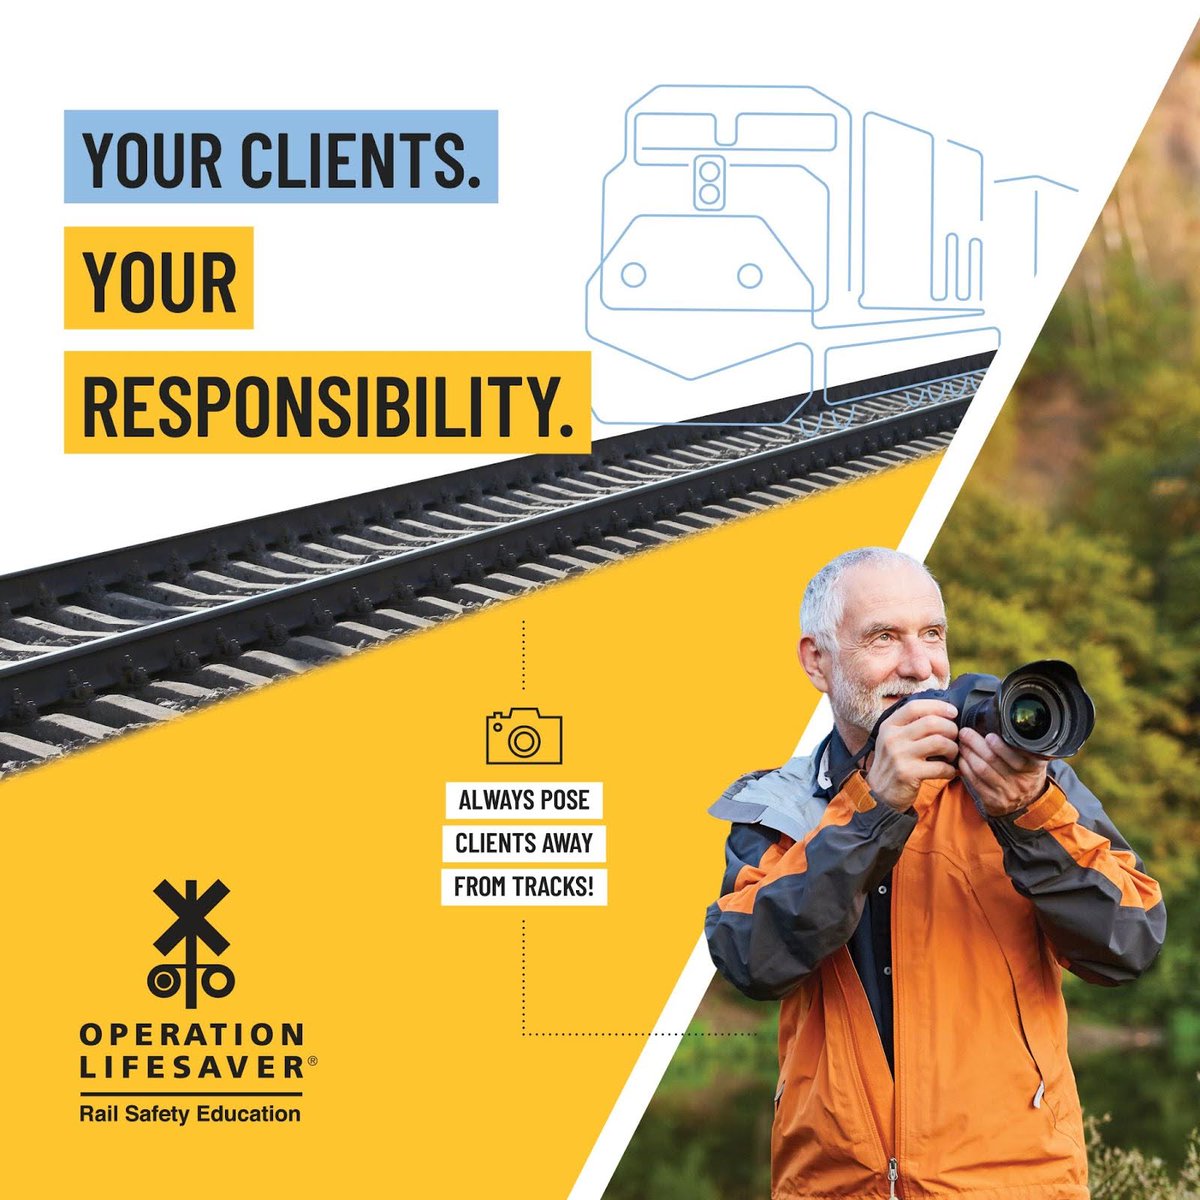 #Photographers — your clients are your responsibility. Keep them and yourself safe. Never take photos on or near  railroad tracks and trains.
#NationalPhotographyMonth
#RailSafetyEducation